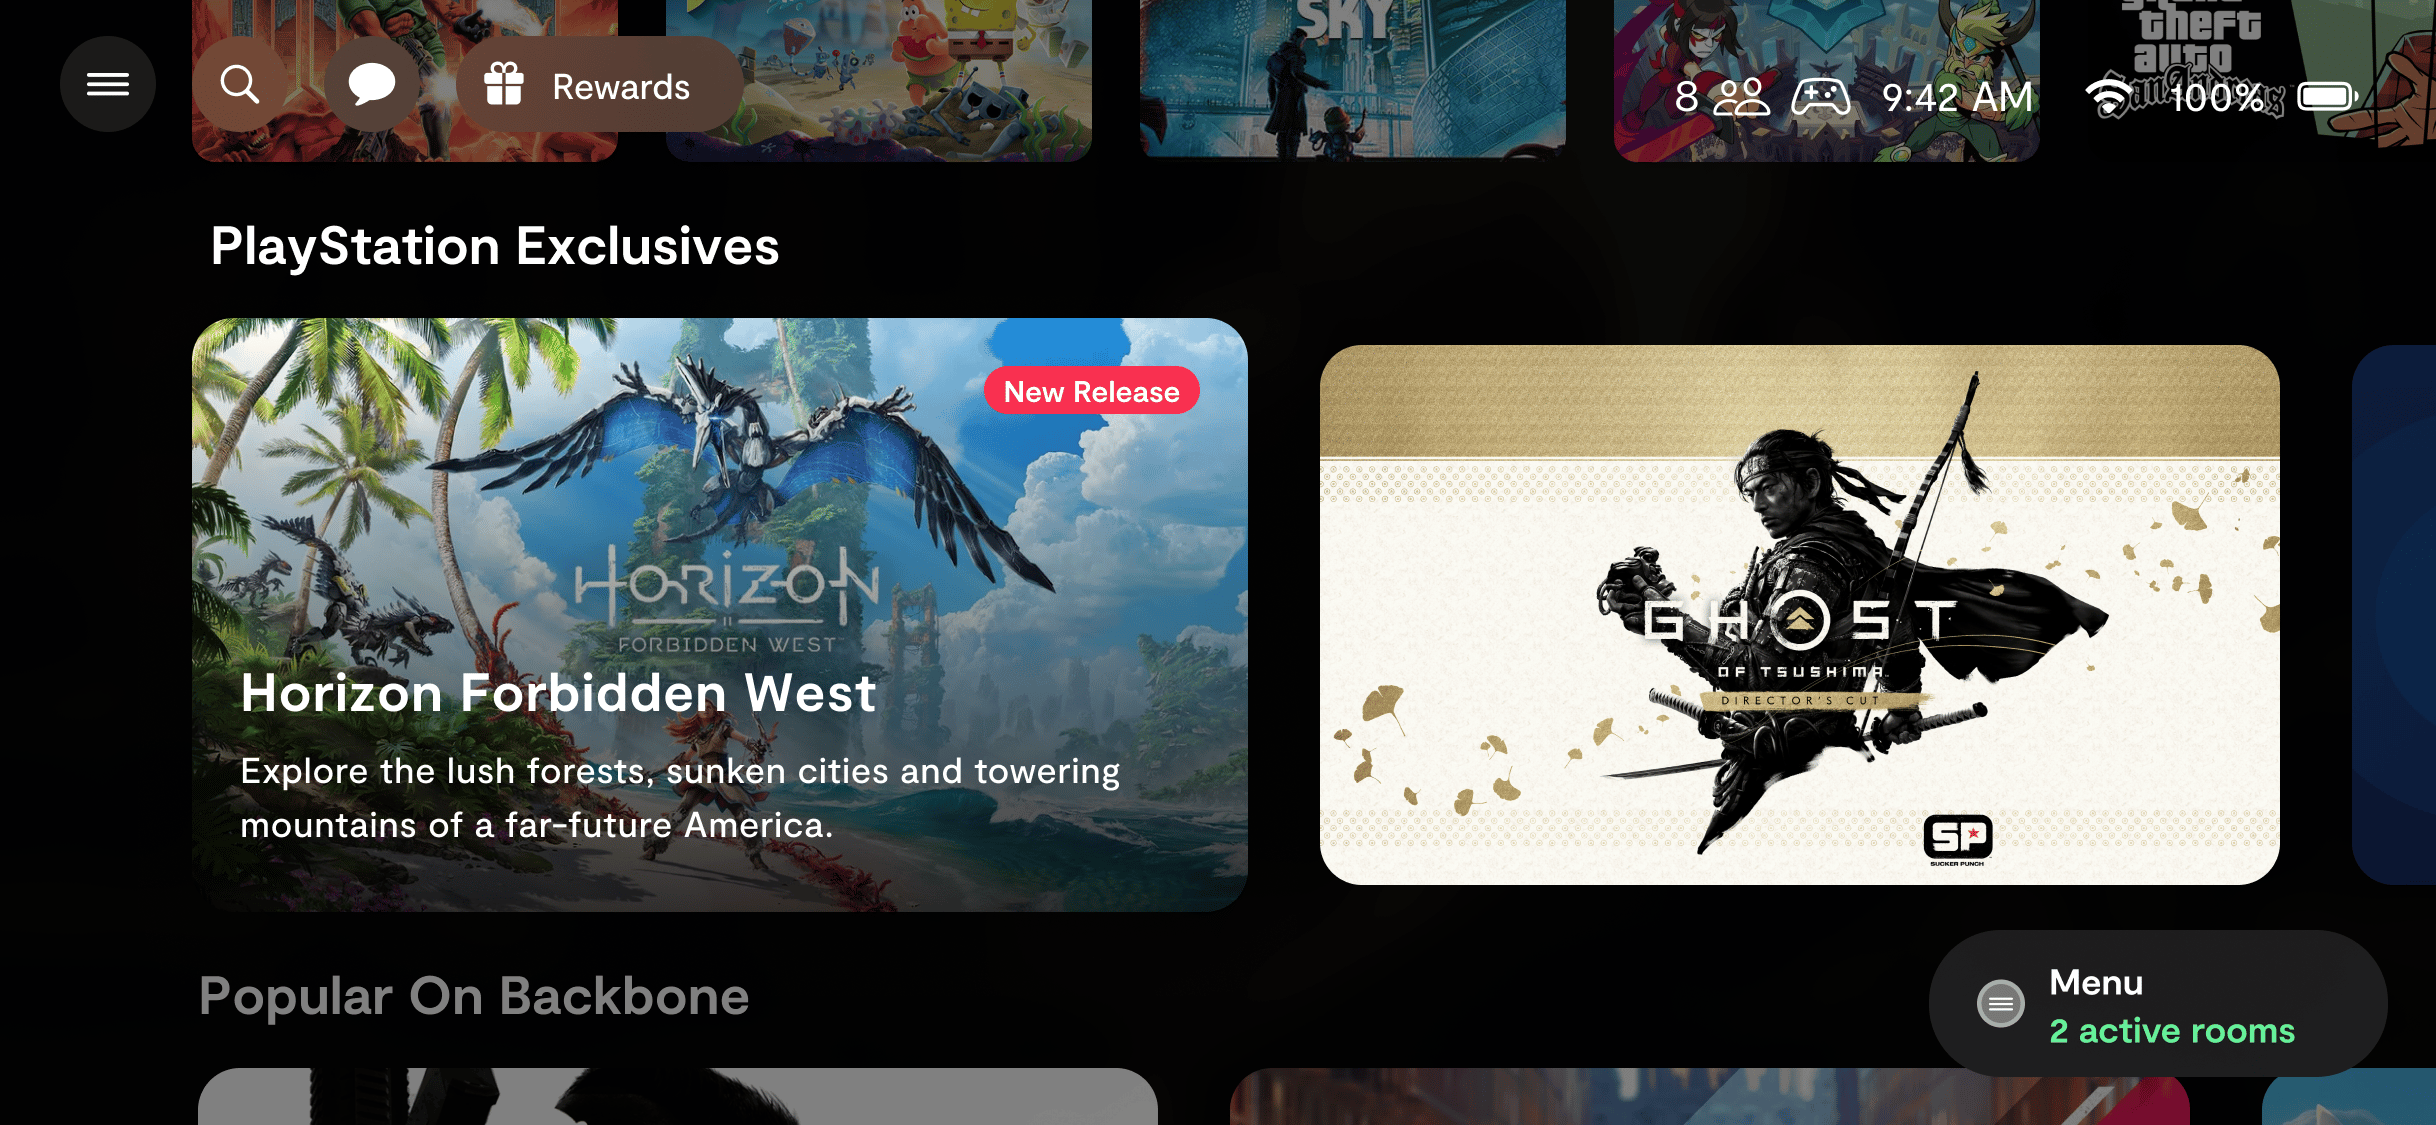 Screenshot of the Backbone app showing two PlayStation exclusive games. “Horizon Forbidden West” on the left, and “Ghost of Tsushima Director’s Cut” on the right.